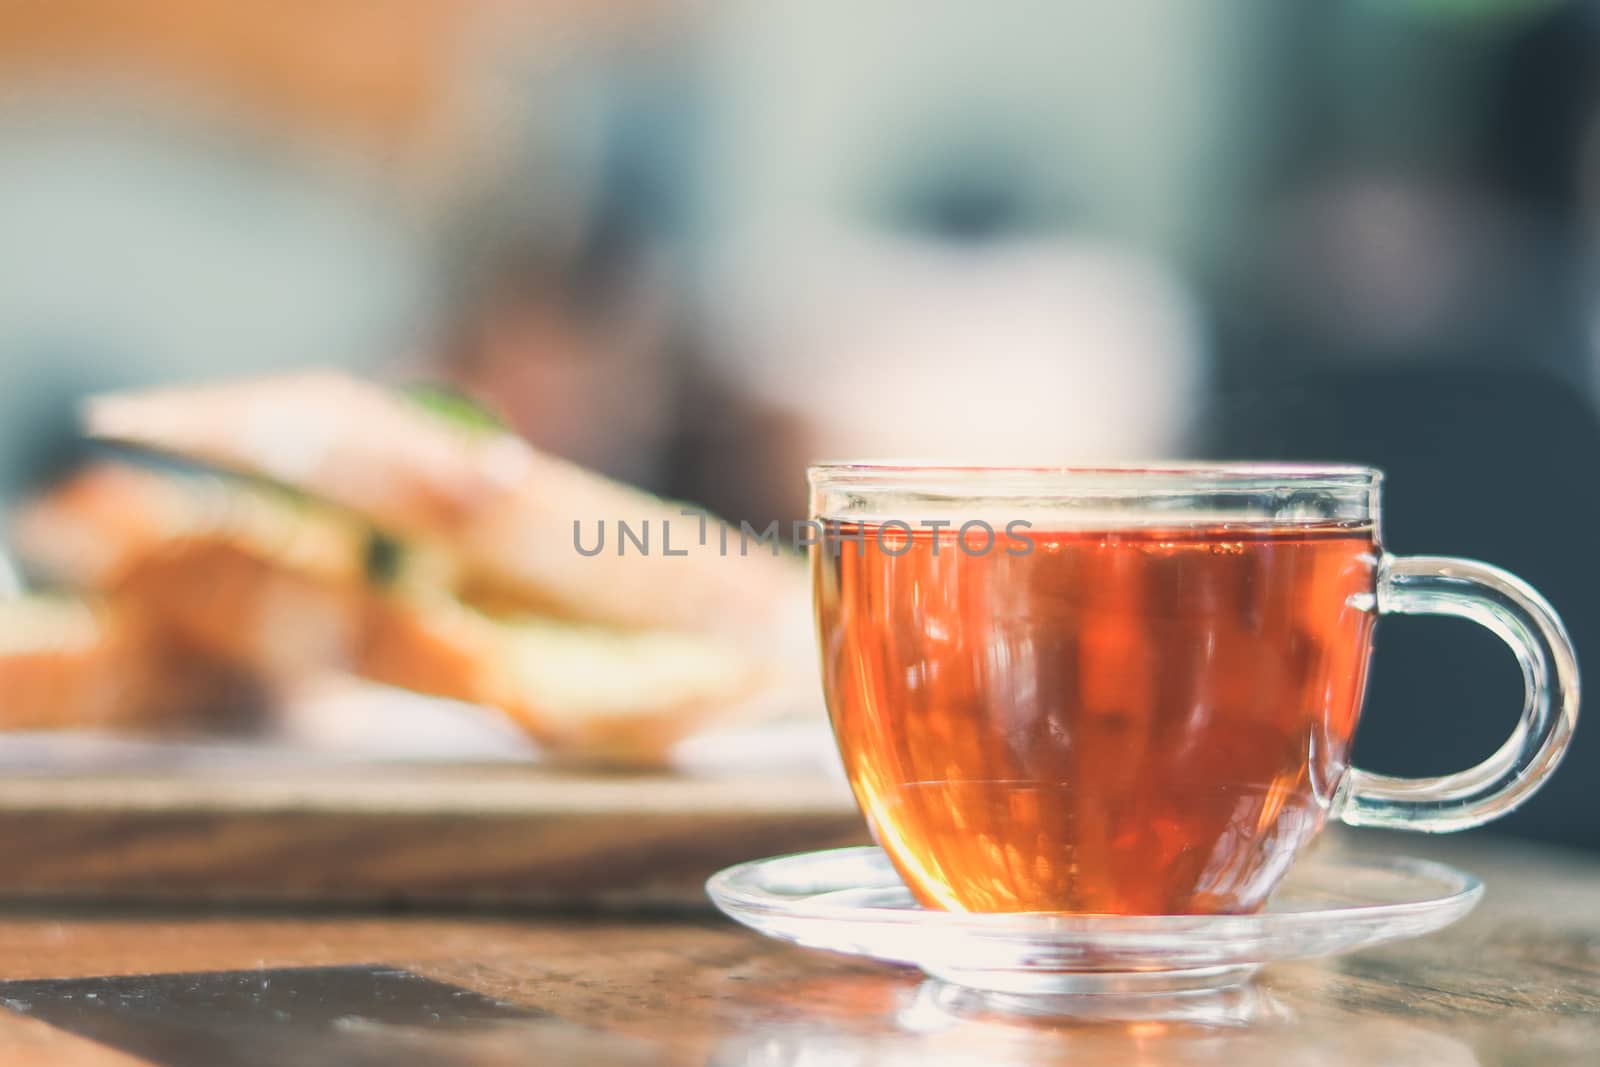 cup of tea at a cafe blurred background and garlic bread. by anotestocker